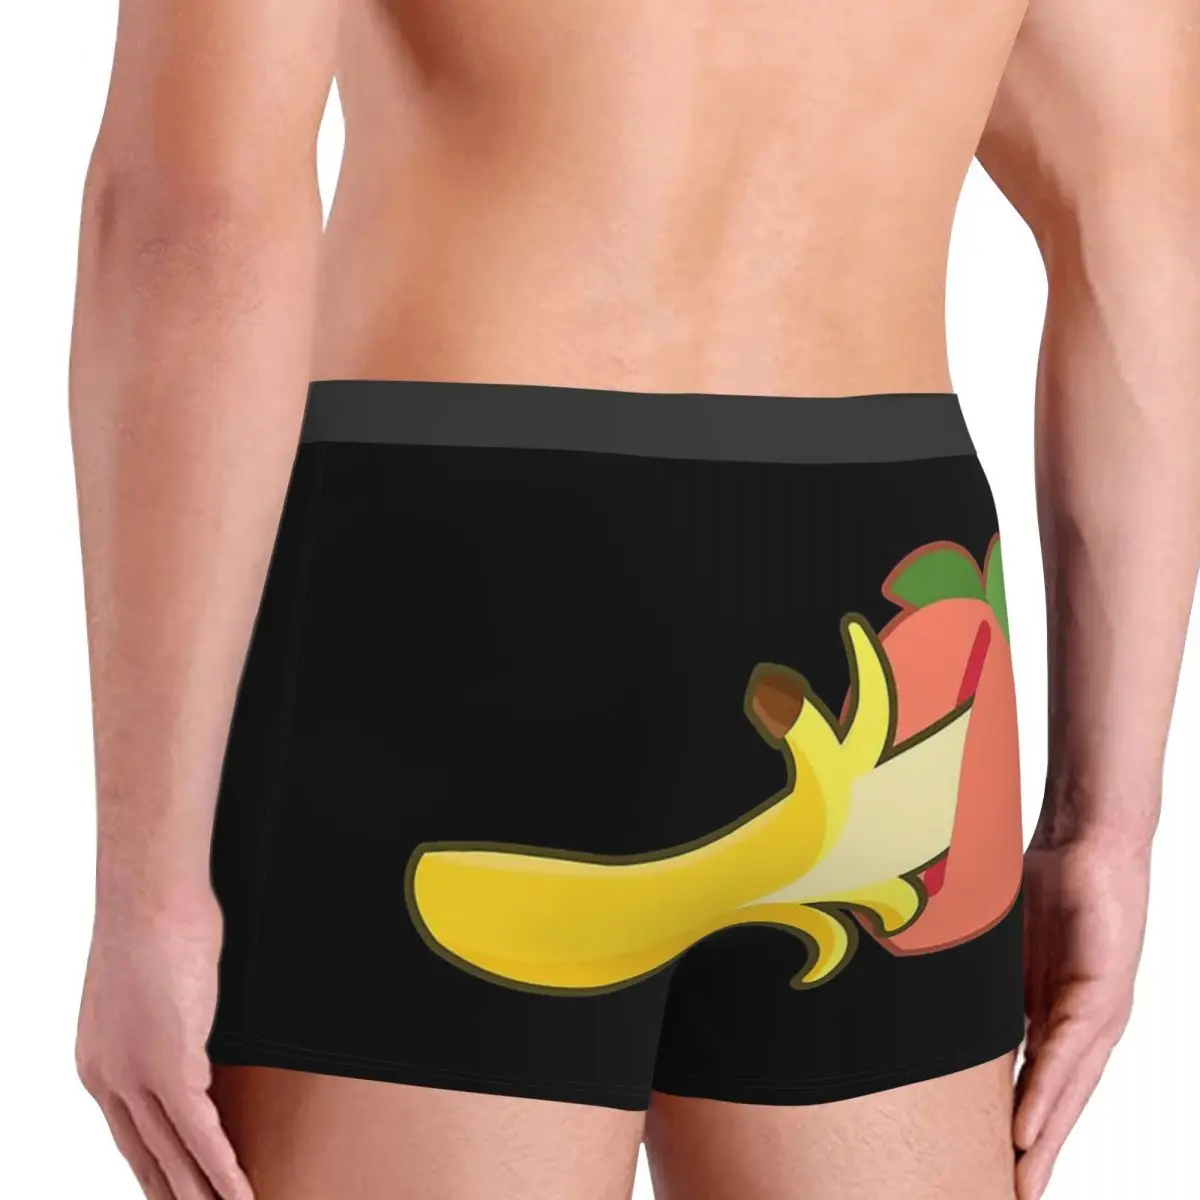 Mens Sexy Cartoon Bamboo Banana Underpants With U Pouch Bulge